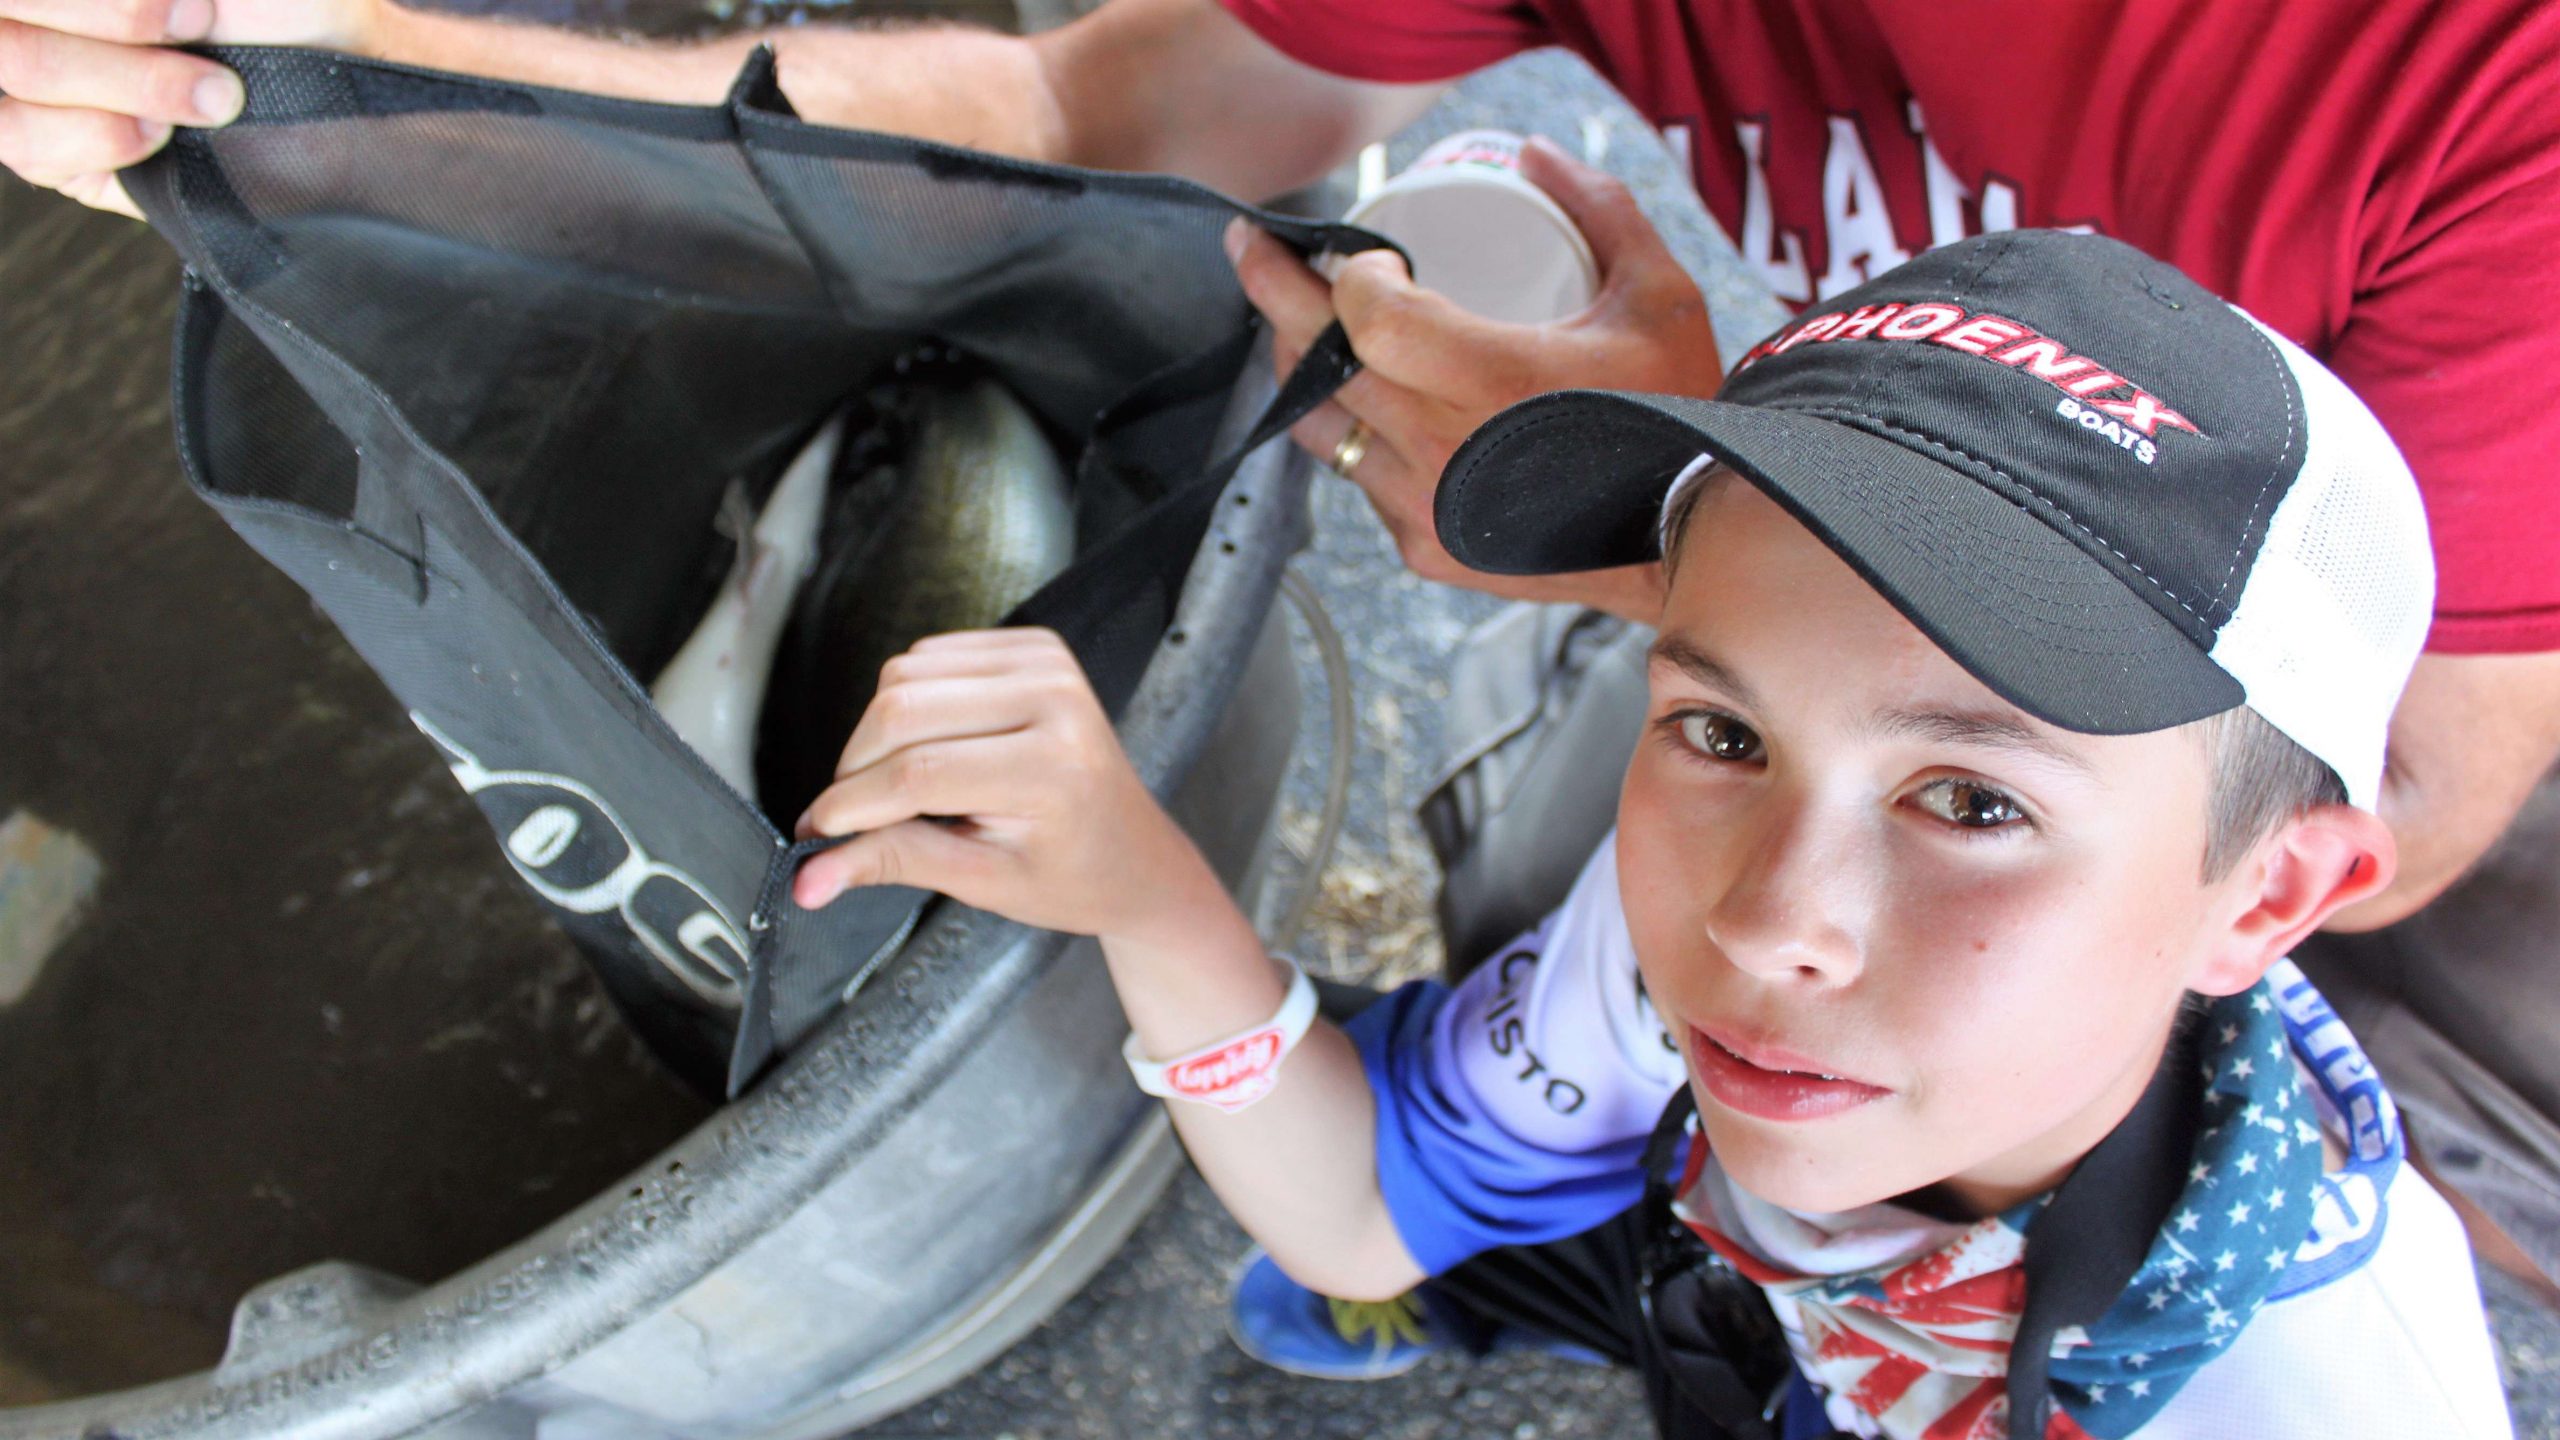 Day 1 was a big one for Rein Golubjatnikov at the Costa Bassmaster Junior Championship presented by DICKâs Sporting Goods. The 13-year old New Yorker had some hefty surprises in store for the crowd gathered in downtown Huntingdon, Tenn. for the beginning of the two-day national championship.